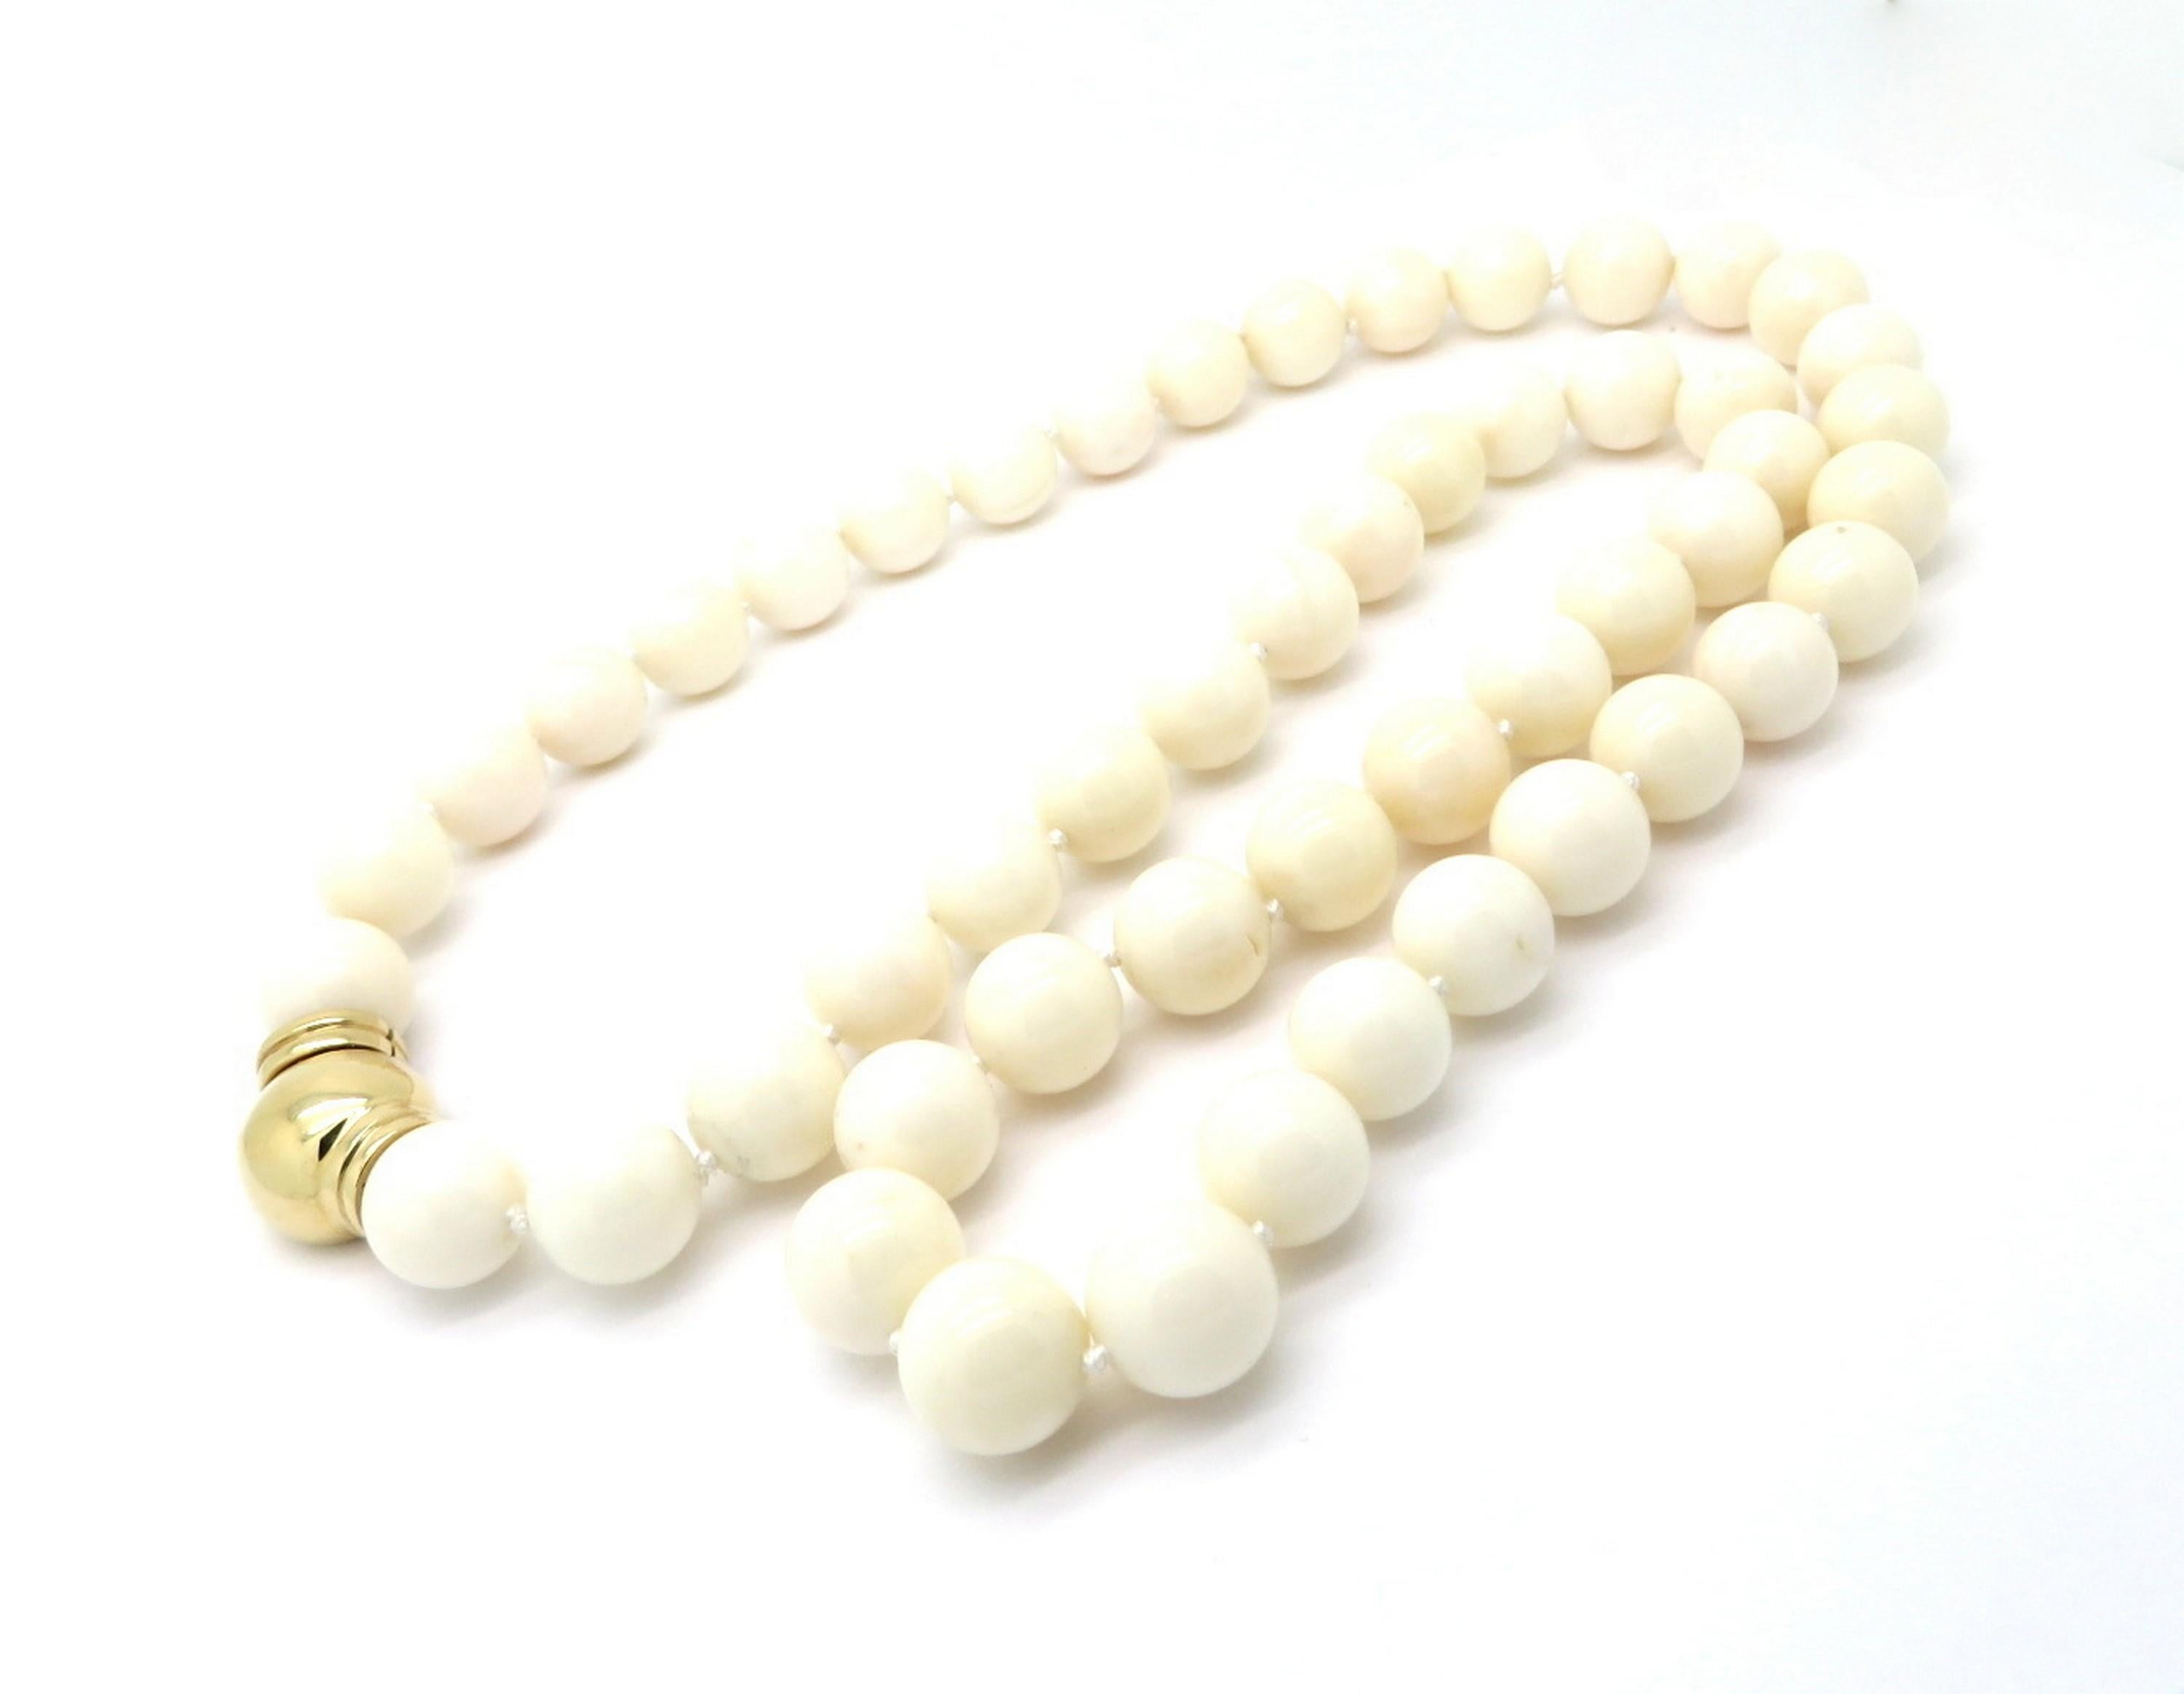 Estate beaded white coral long necklace. Featuring 51 round white coral beads each measuring an average of 14 mm. The necklace measures 30” inches long. It is secured with a 14K yellow gold rounded clasp with a push hinge closure.  The total net